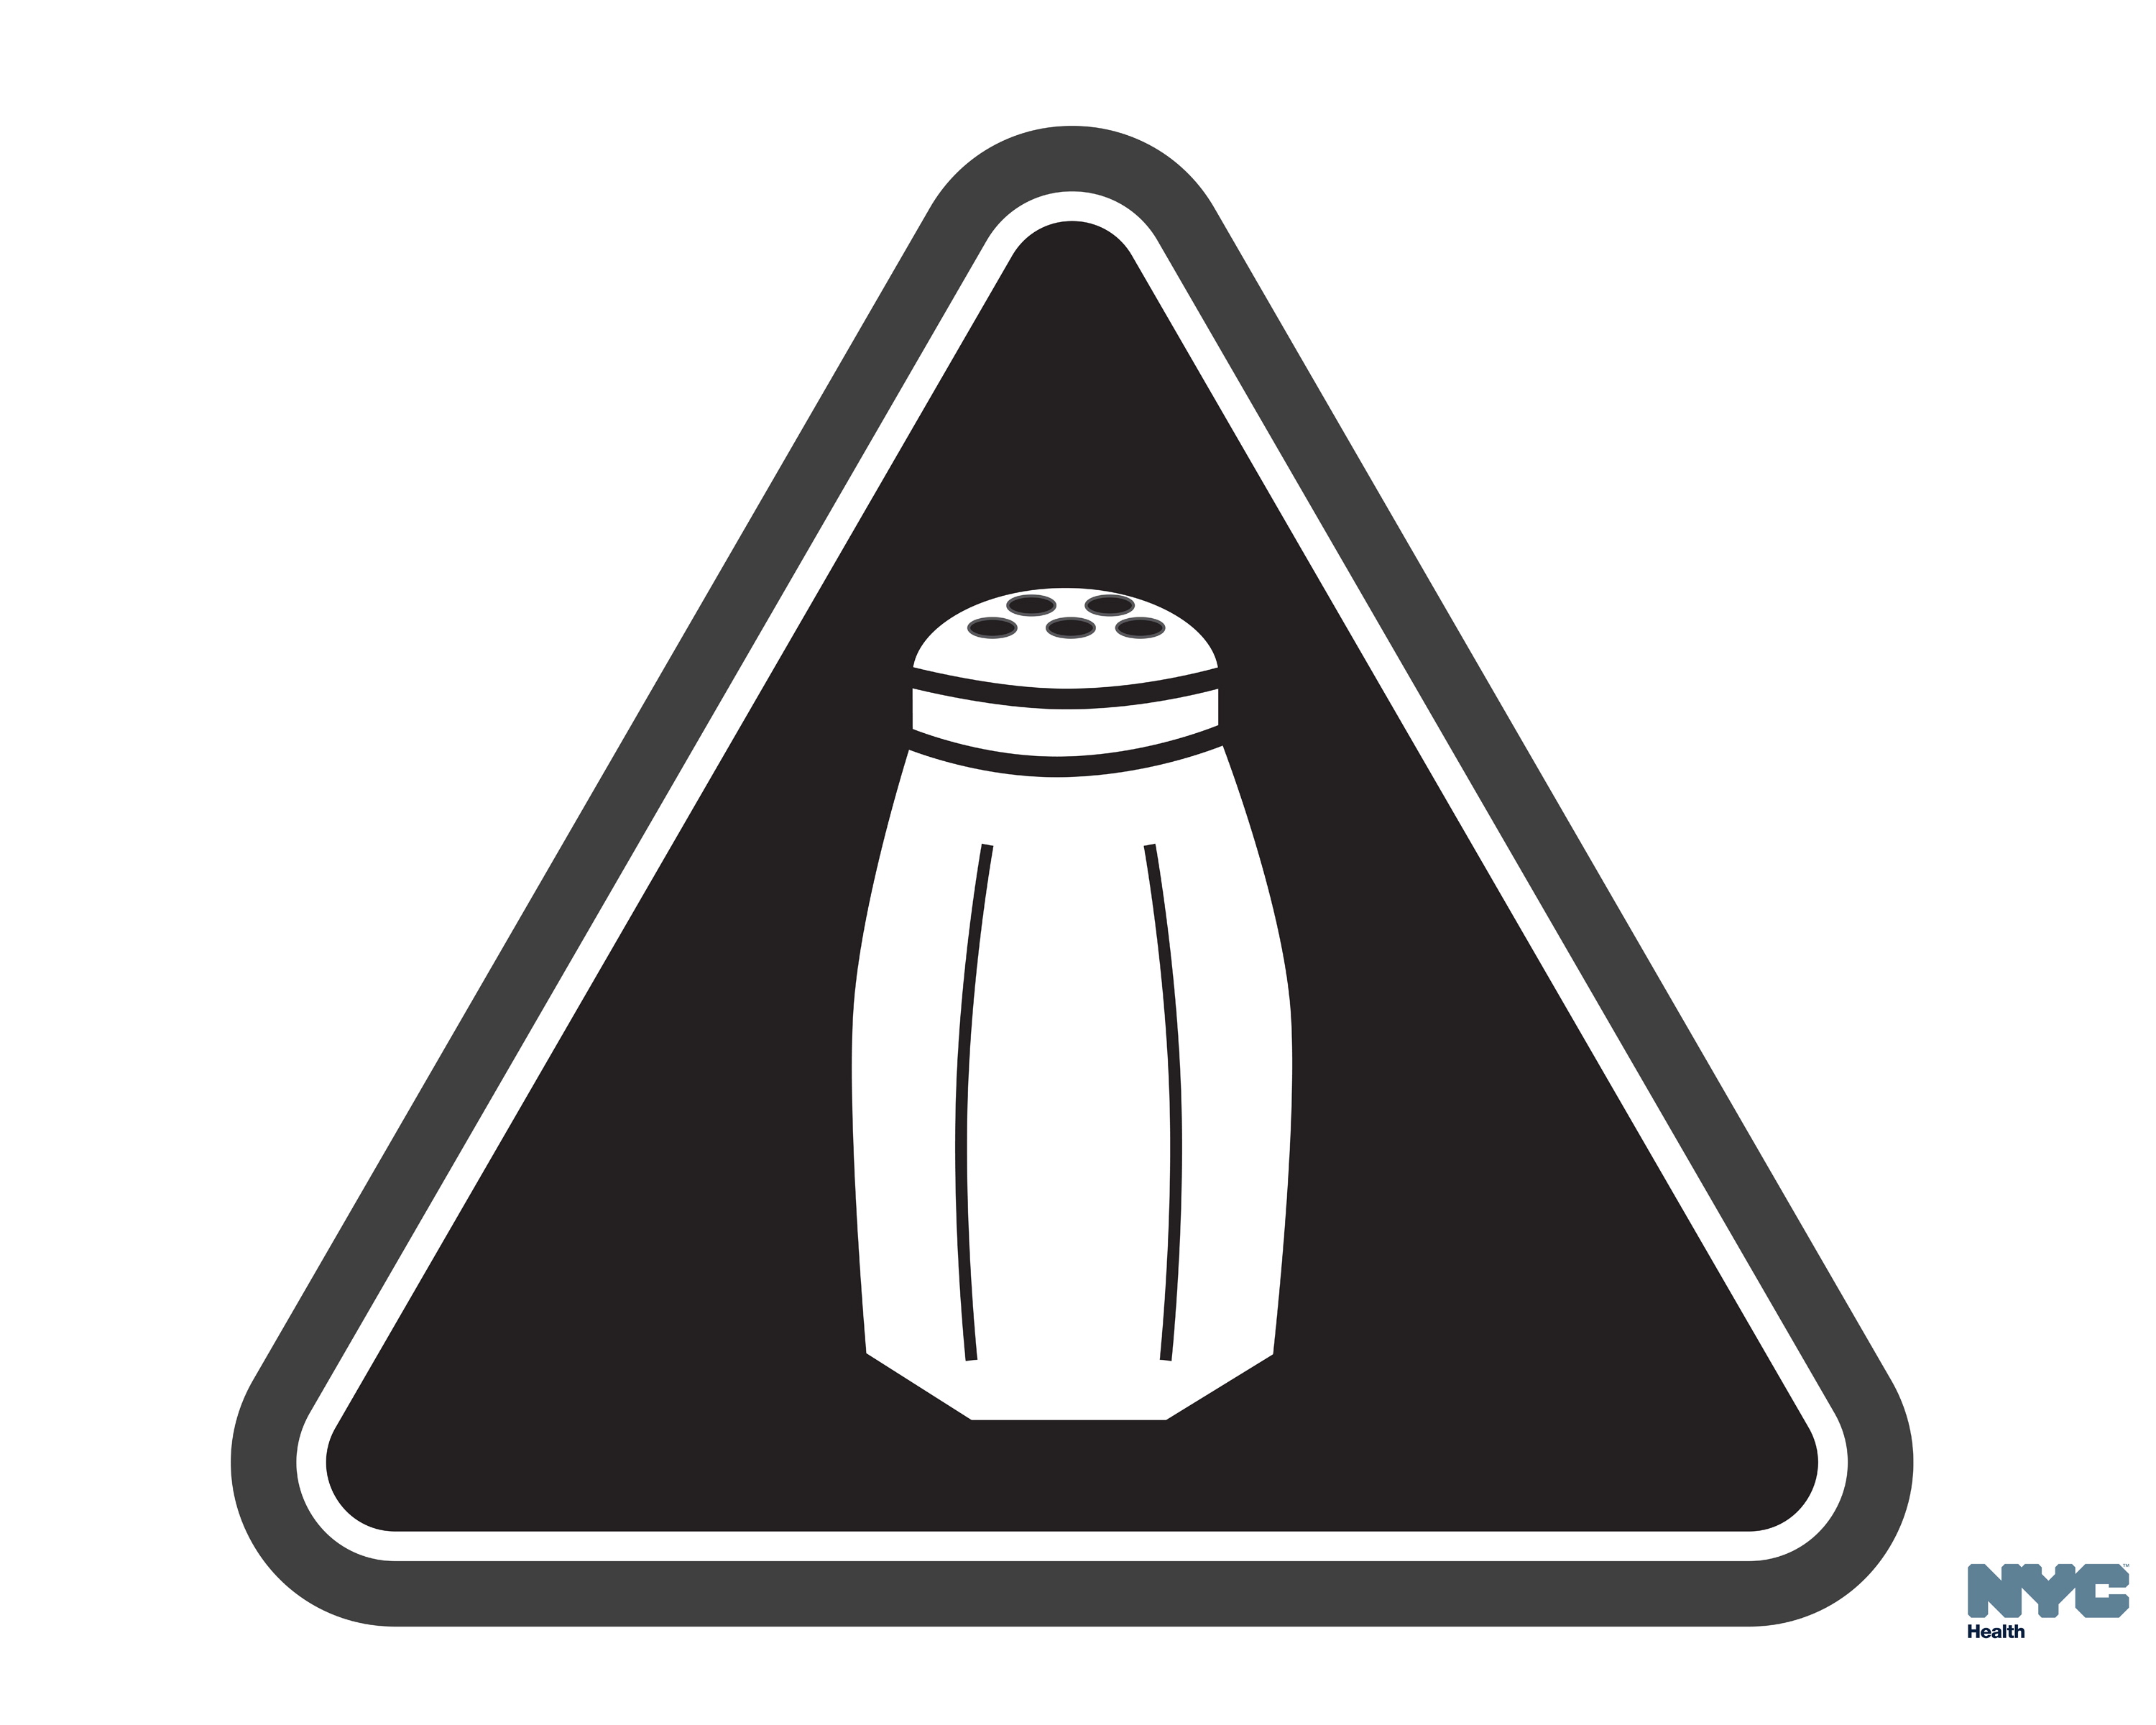 A graphic that will soon be warning NYC consumers of high salt content.